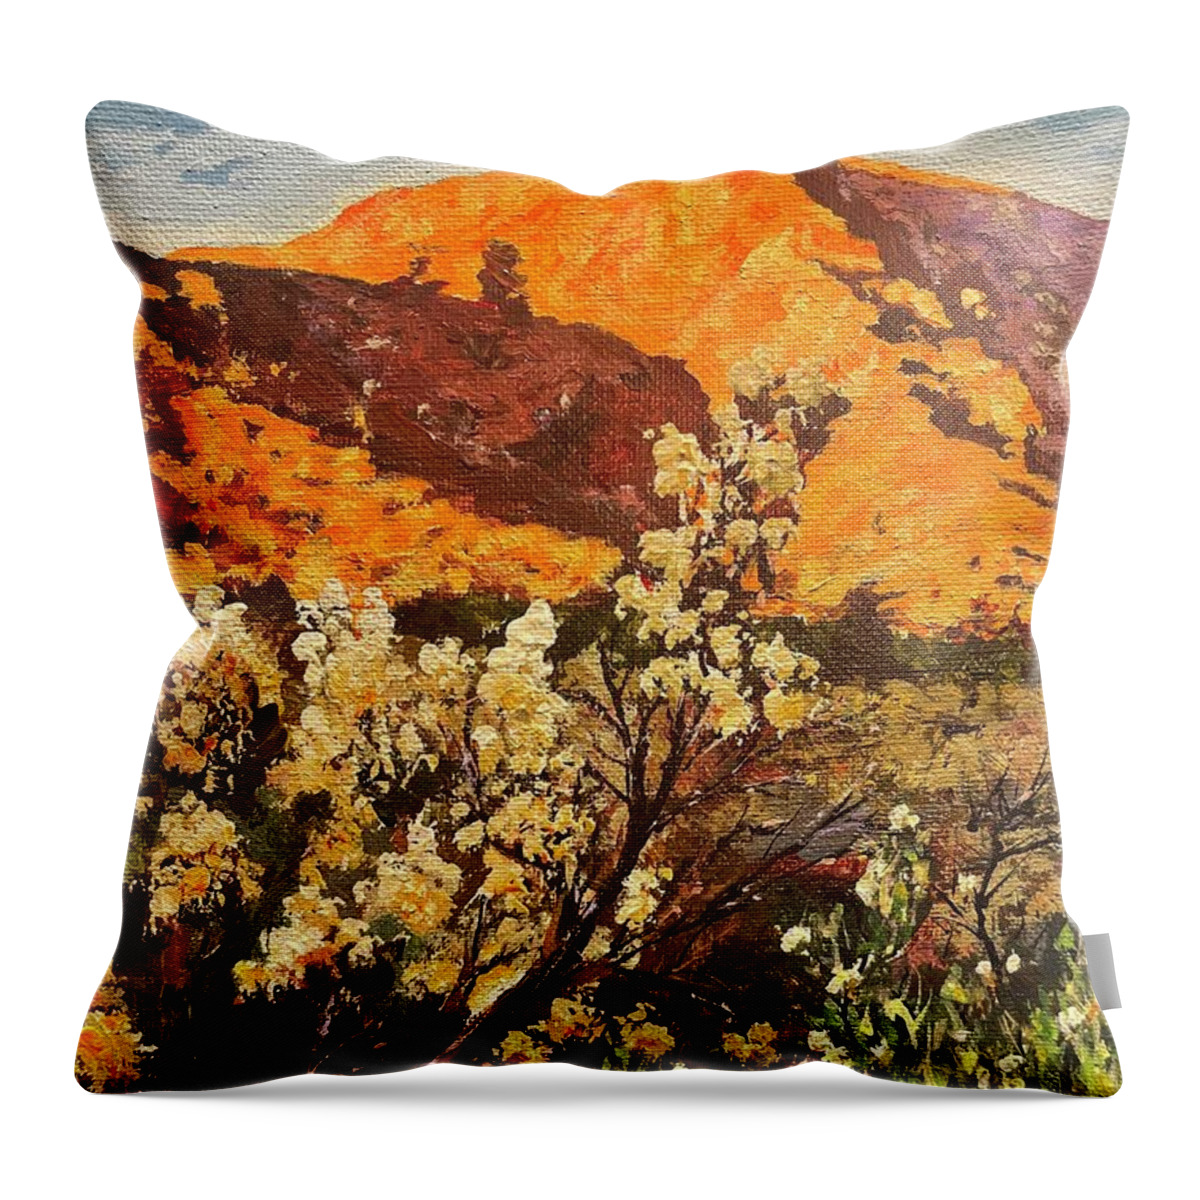 Landscape Throw Pillow featuring the painting Fortuna mountain 2 by Ray Khalife